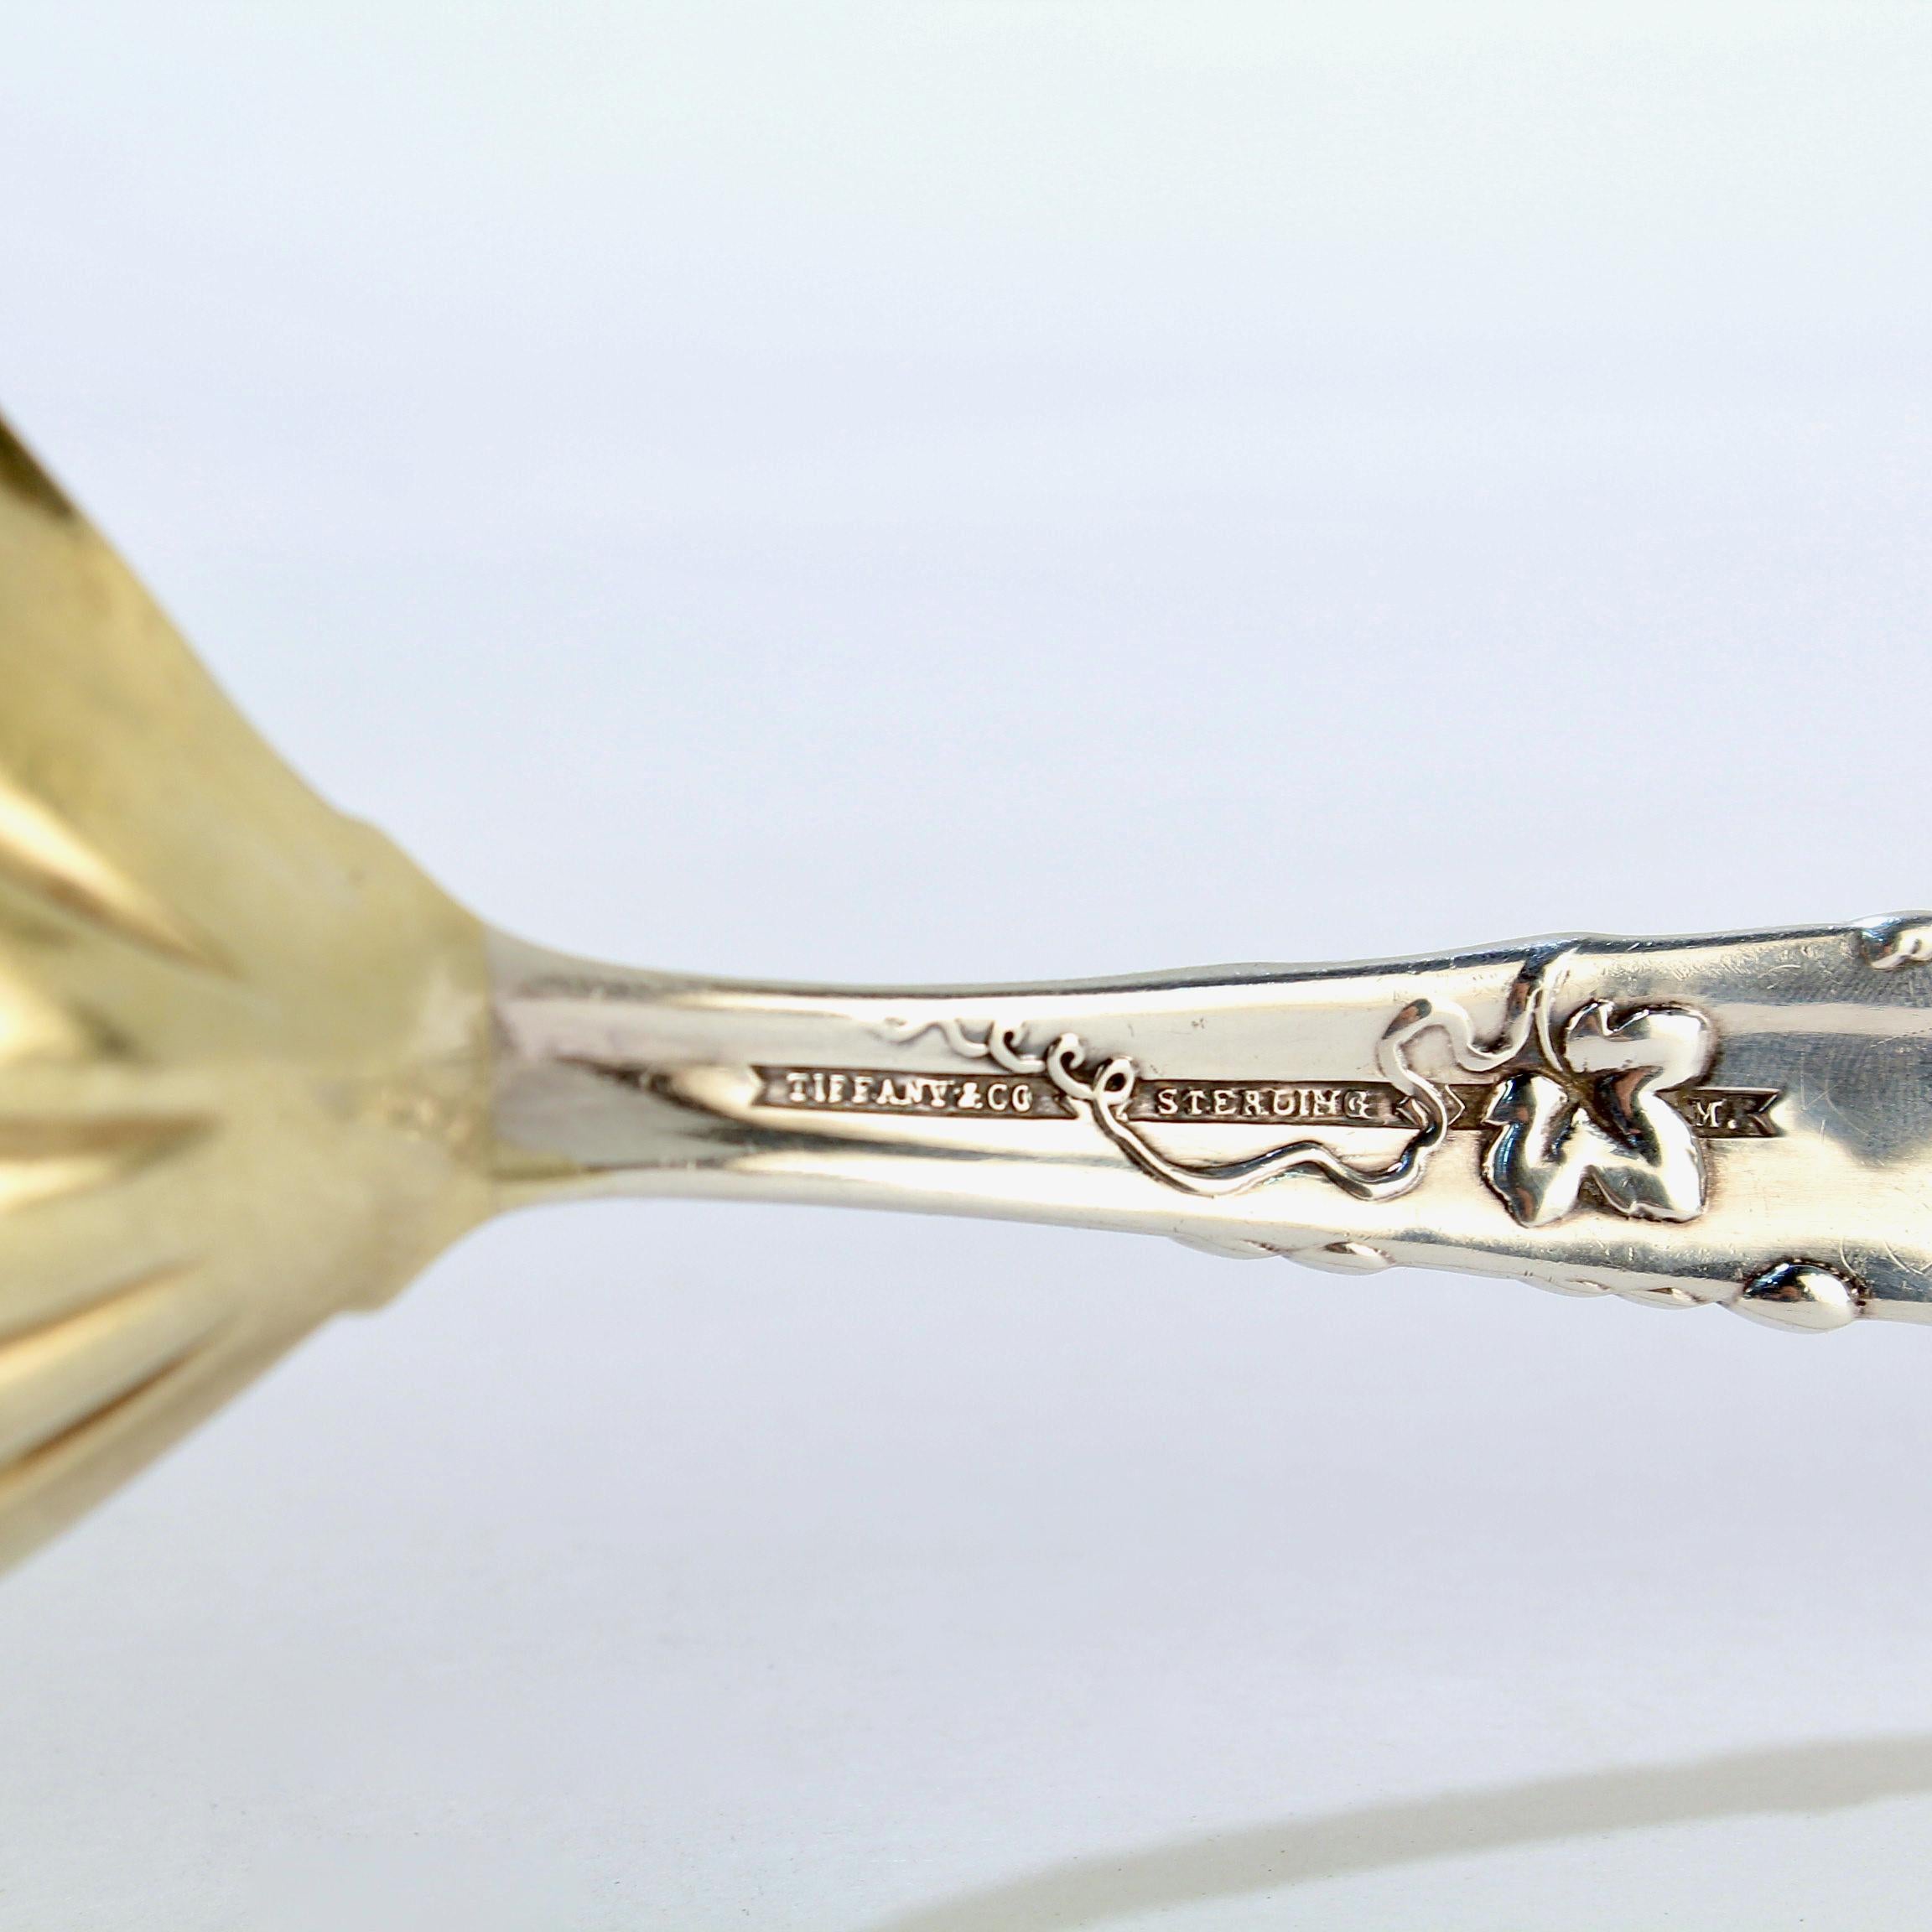 Tiffany & Co. Sterling Silver Vine Pattern Berry or Serving Spoon For Sale 4